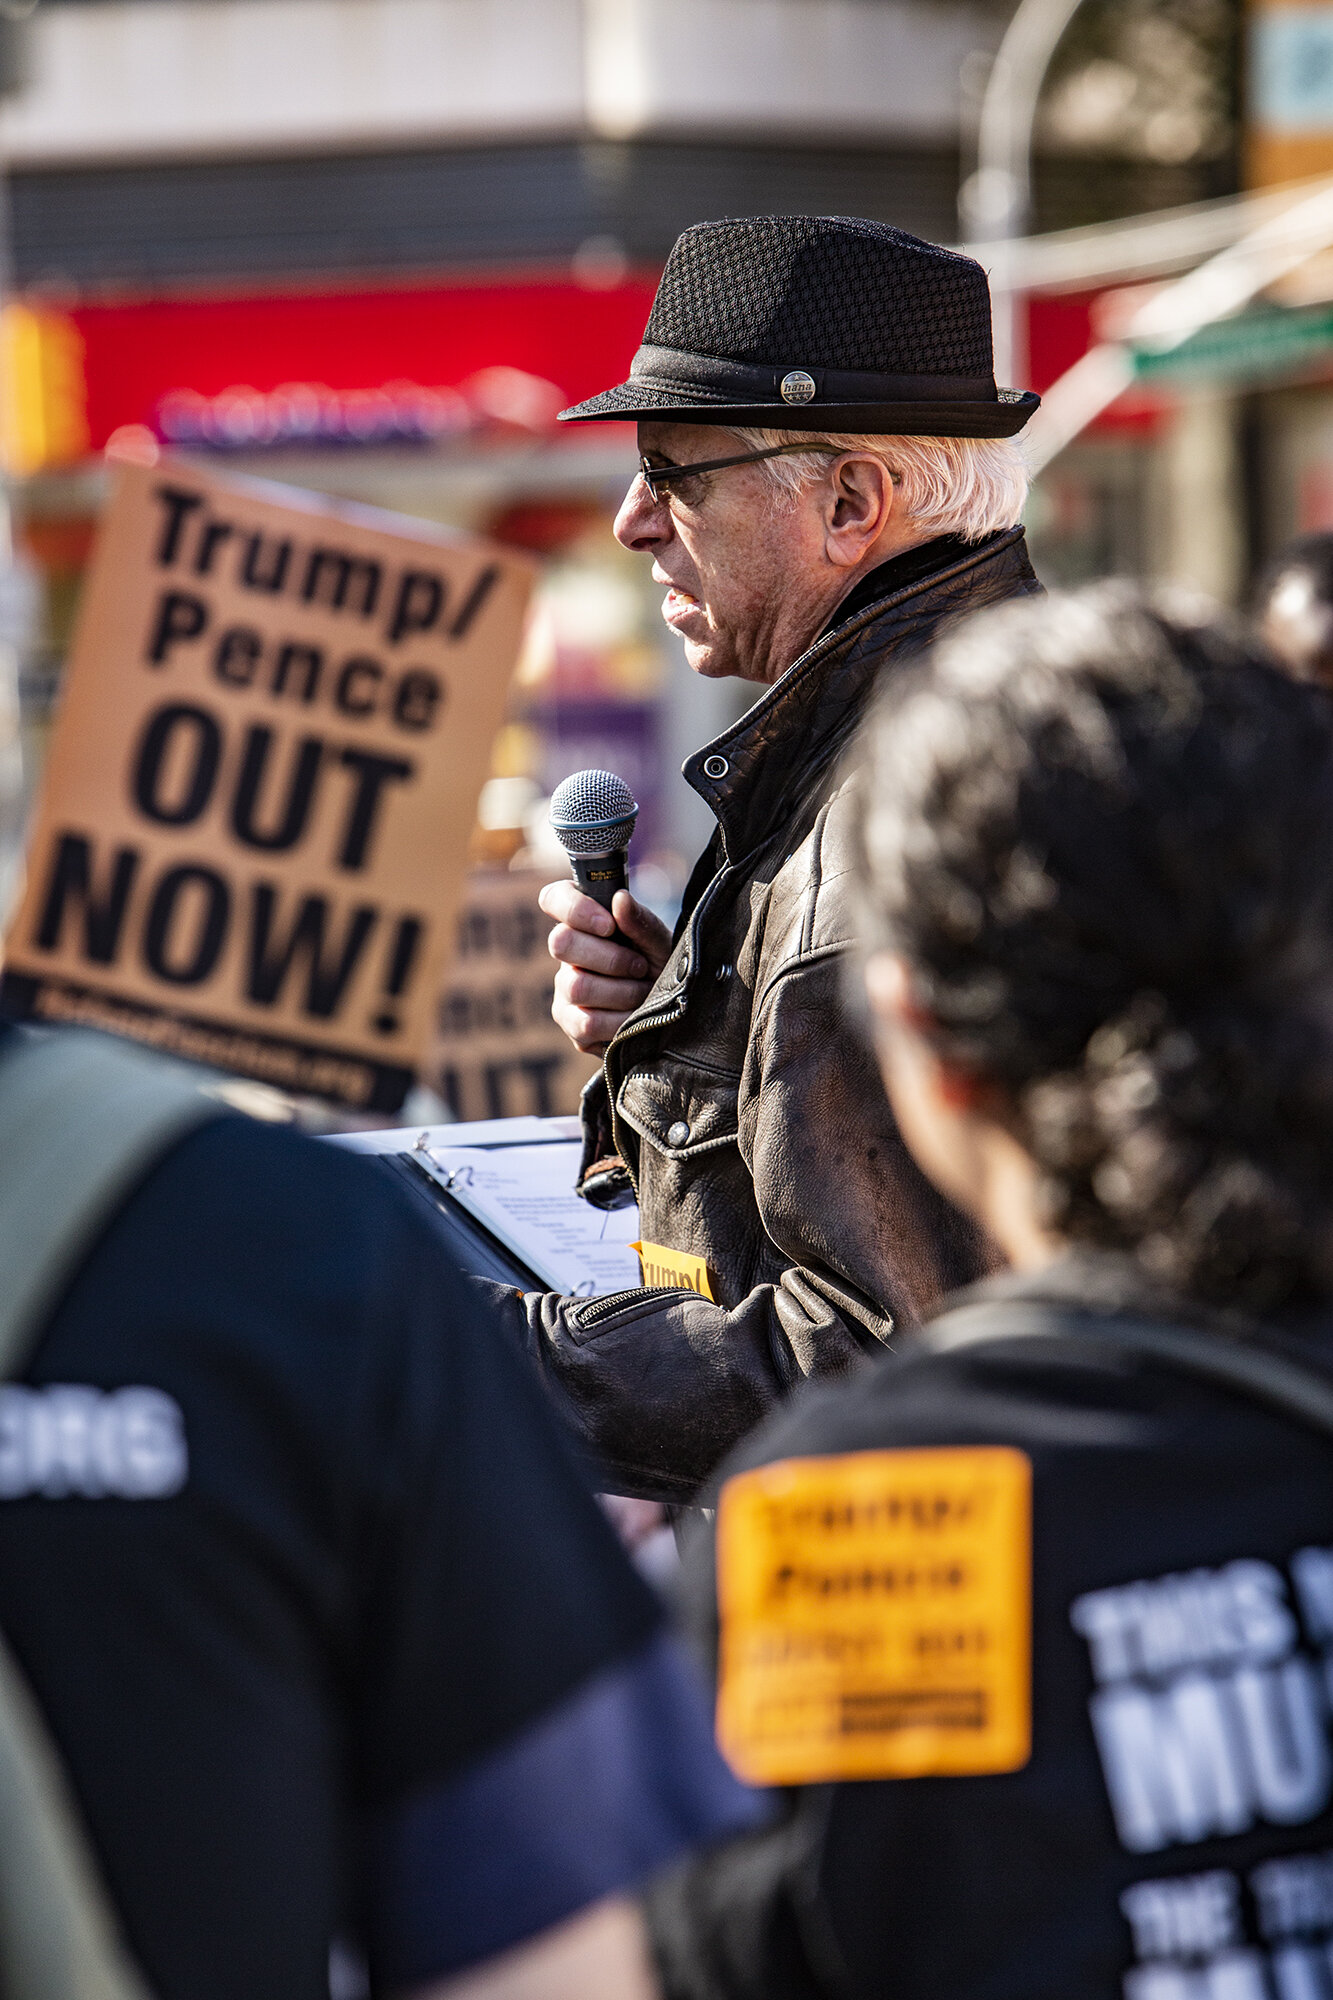 OUTNOW_Protest_2019_NYC-0393.jpg